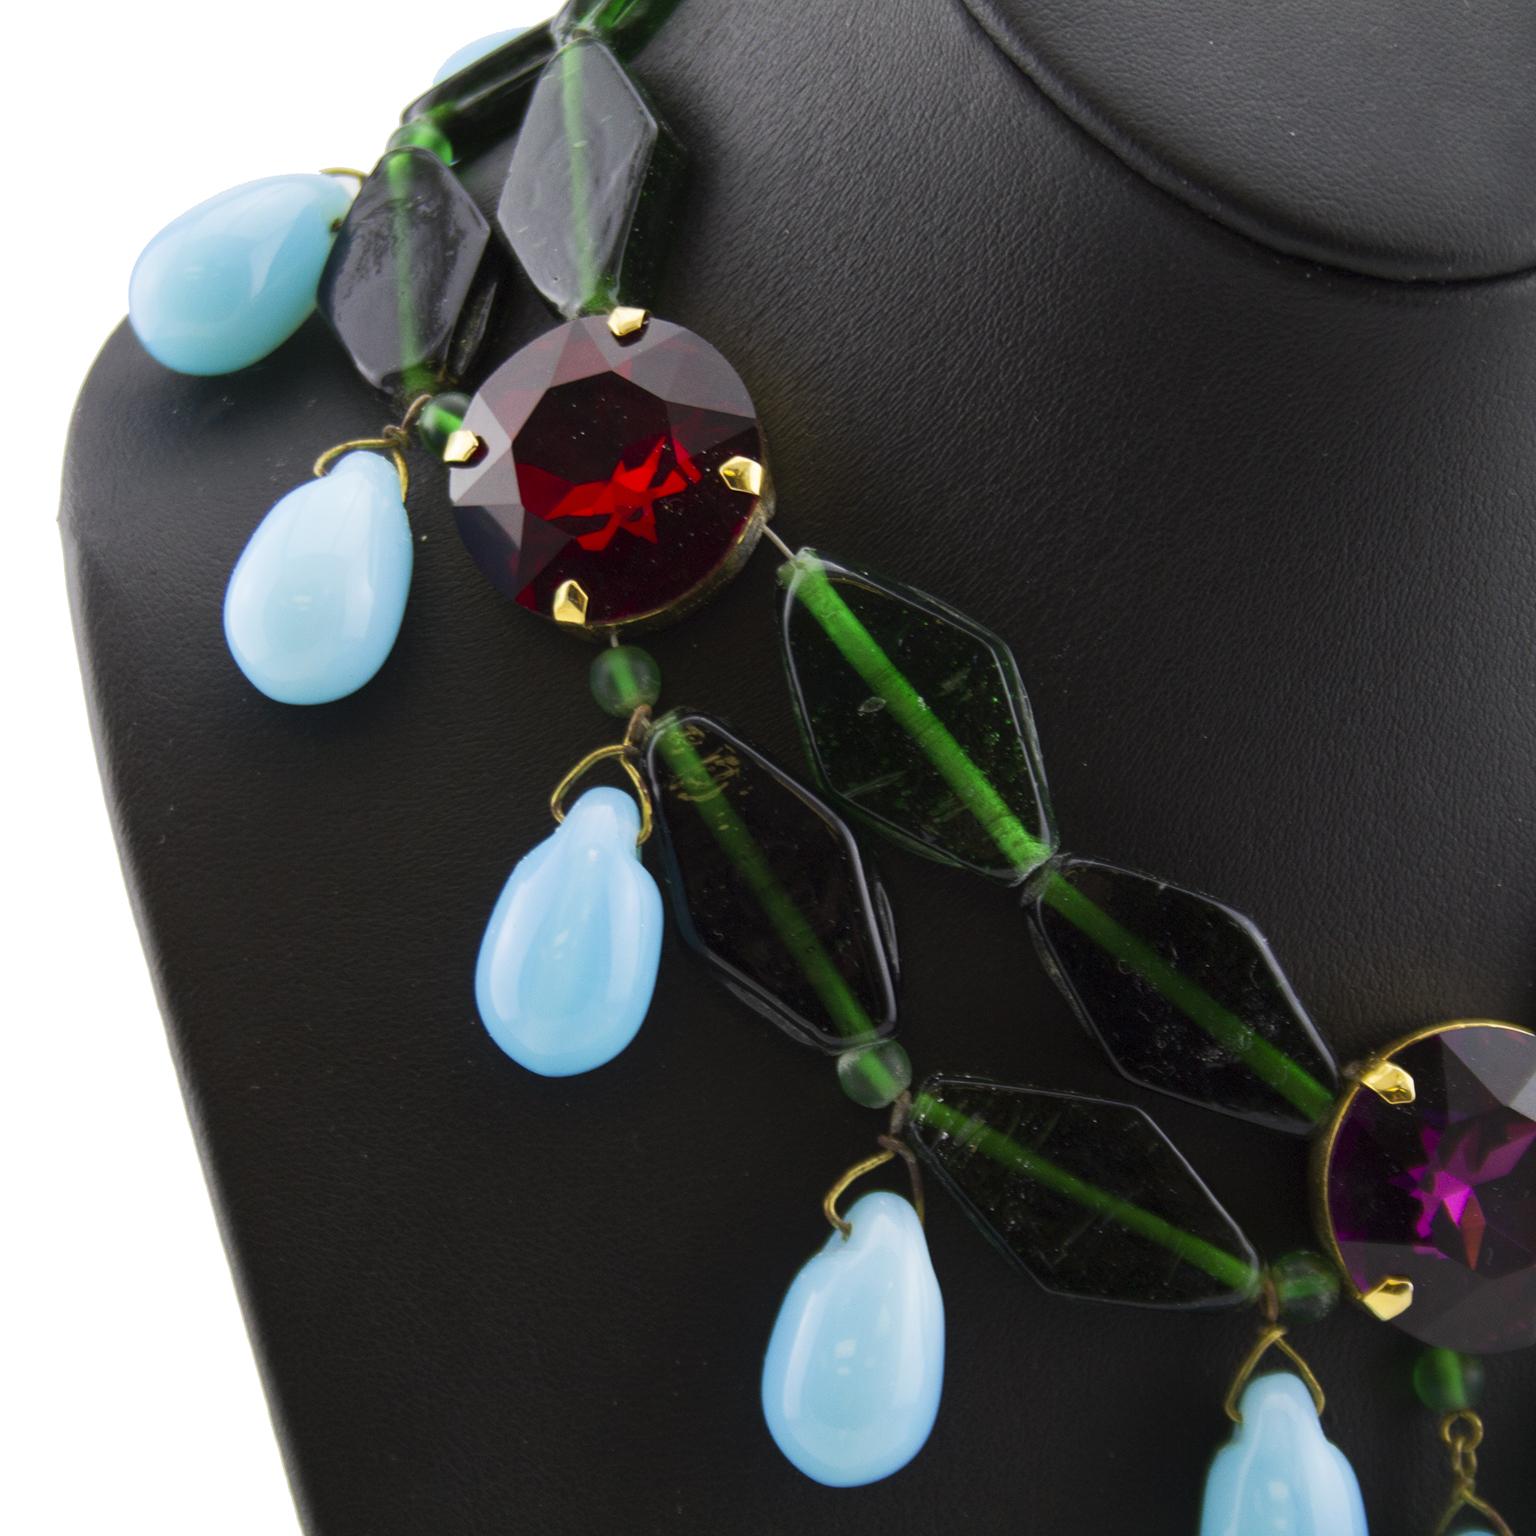 Stunning 1980s Yves Saint Laurent Rive Gauche Lou Lou de la Falaise era statement necklace. Green faceted glass diamond shaped beads with three large circular stones, two red and one purple. Turquoise tear drop shape beads hang throughout. Hook